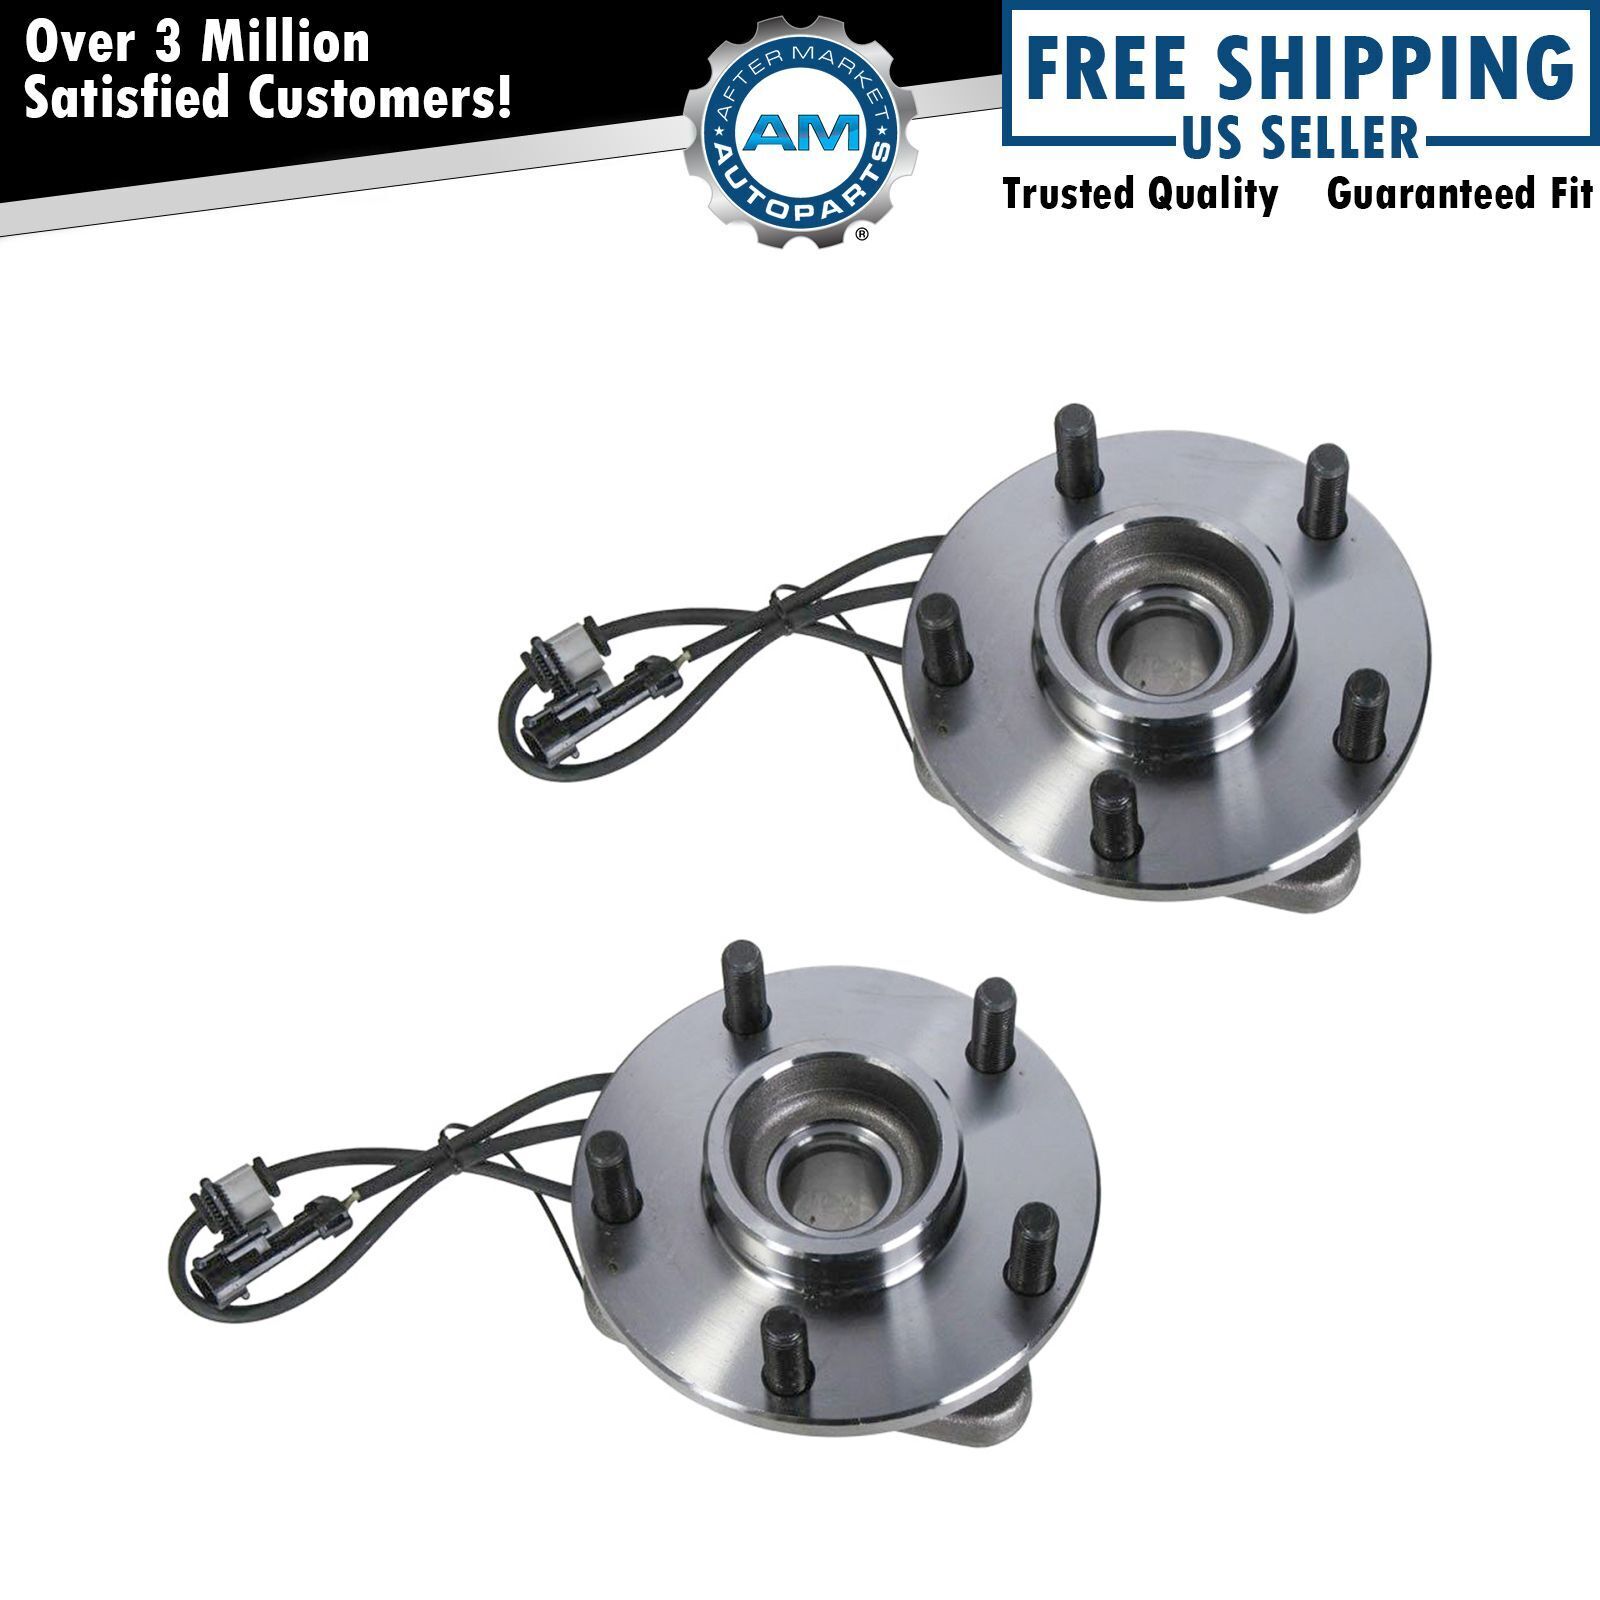 Front Wheel Hub & Bearing Pair Set for Chevy GMC Blazer Jimmy 2WD 2x4 w/ ABS